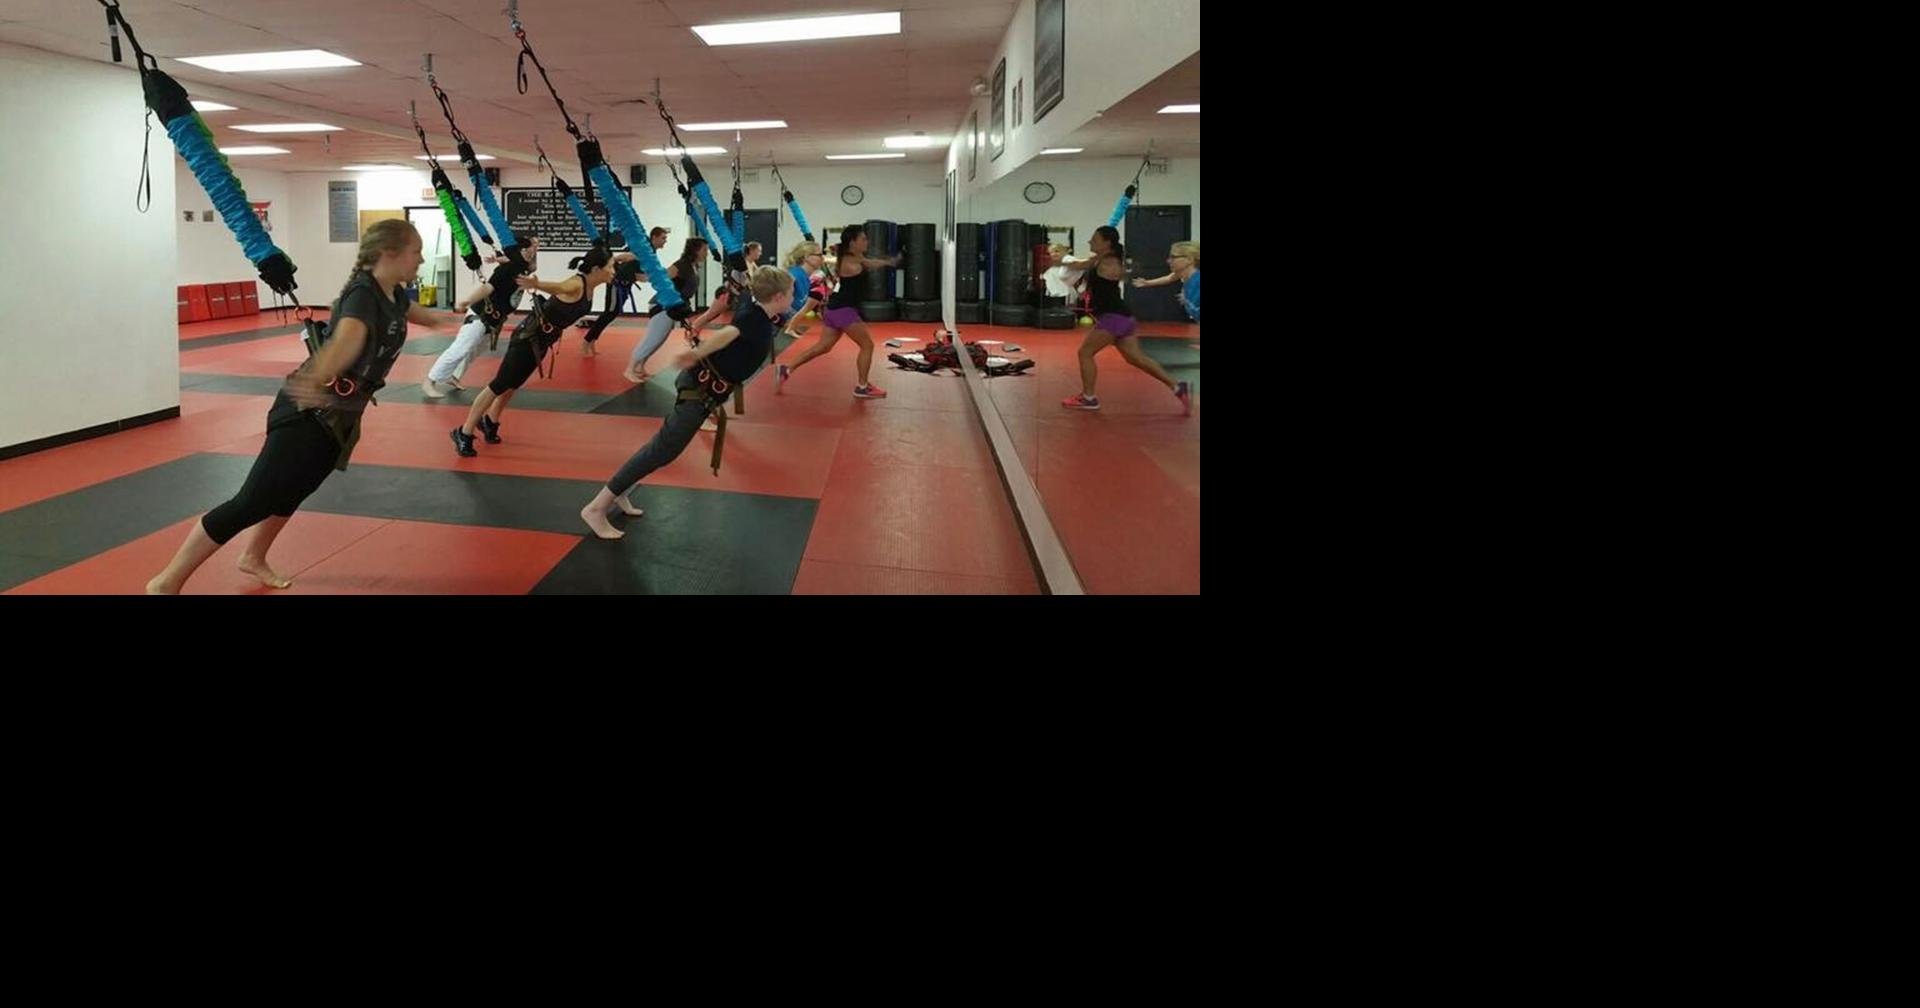 Bungee fitness for 1 person - Focus Studio